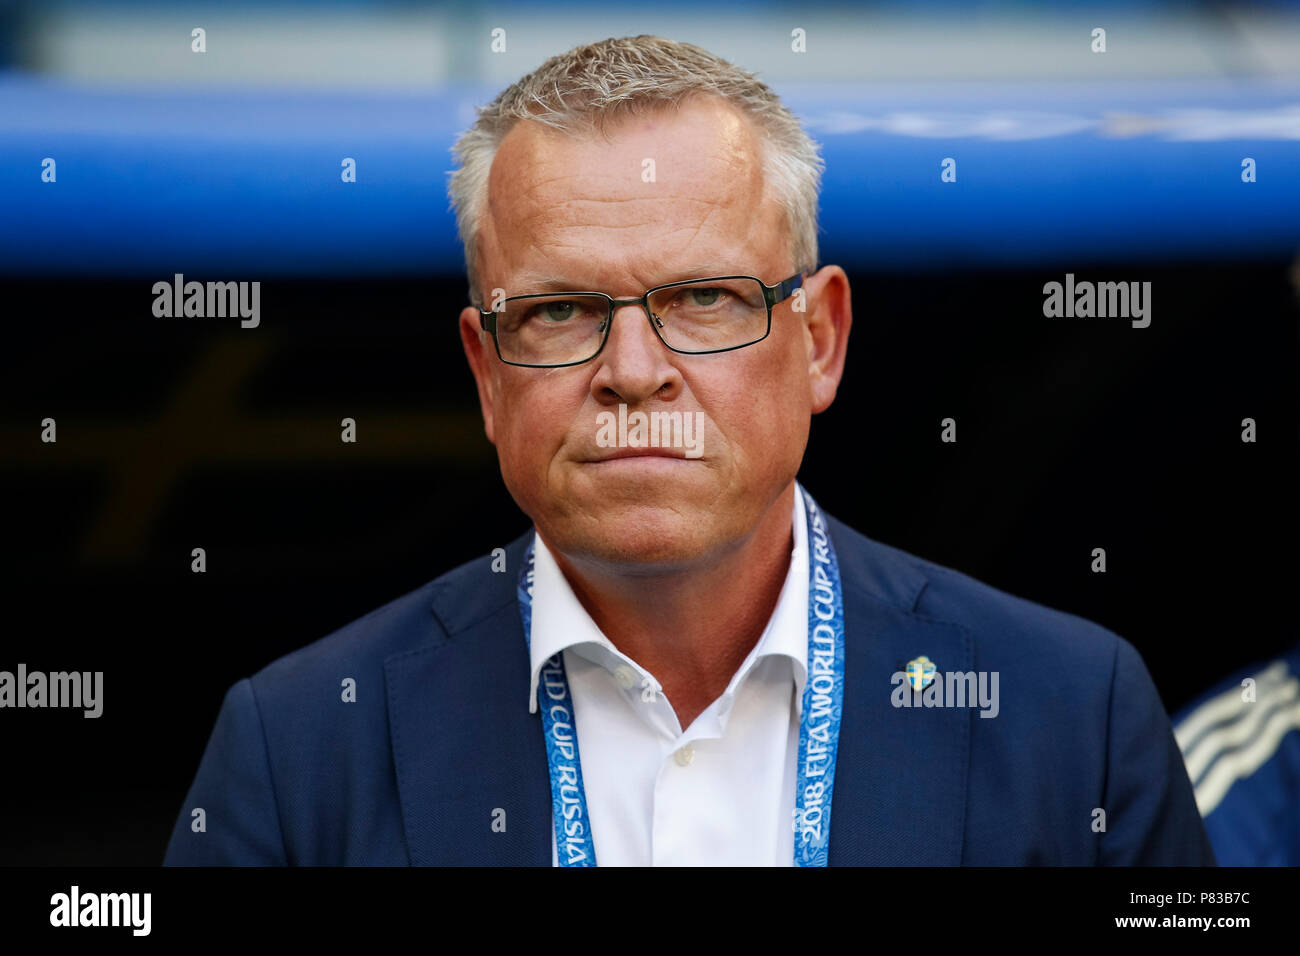 Samara, Russia. 7th July, 2018. Sweden Manager Janne Andersson before the 2018 FIFA World Cup Quarter Final match between Sweden and England at Samara Arena on July 7th 2018 in Samara, Russia. (Photo by Daniel Chesterton/phcimages.com) Credit: PHC Images/Alamy Live News Stock Photo